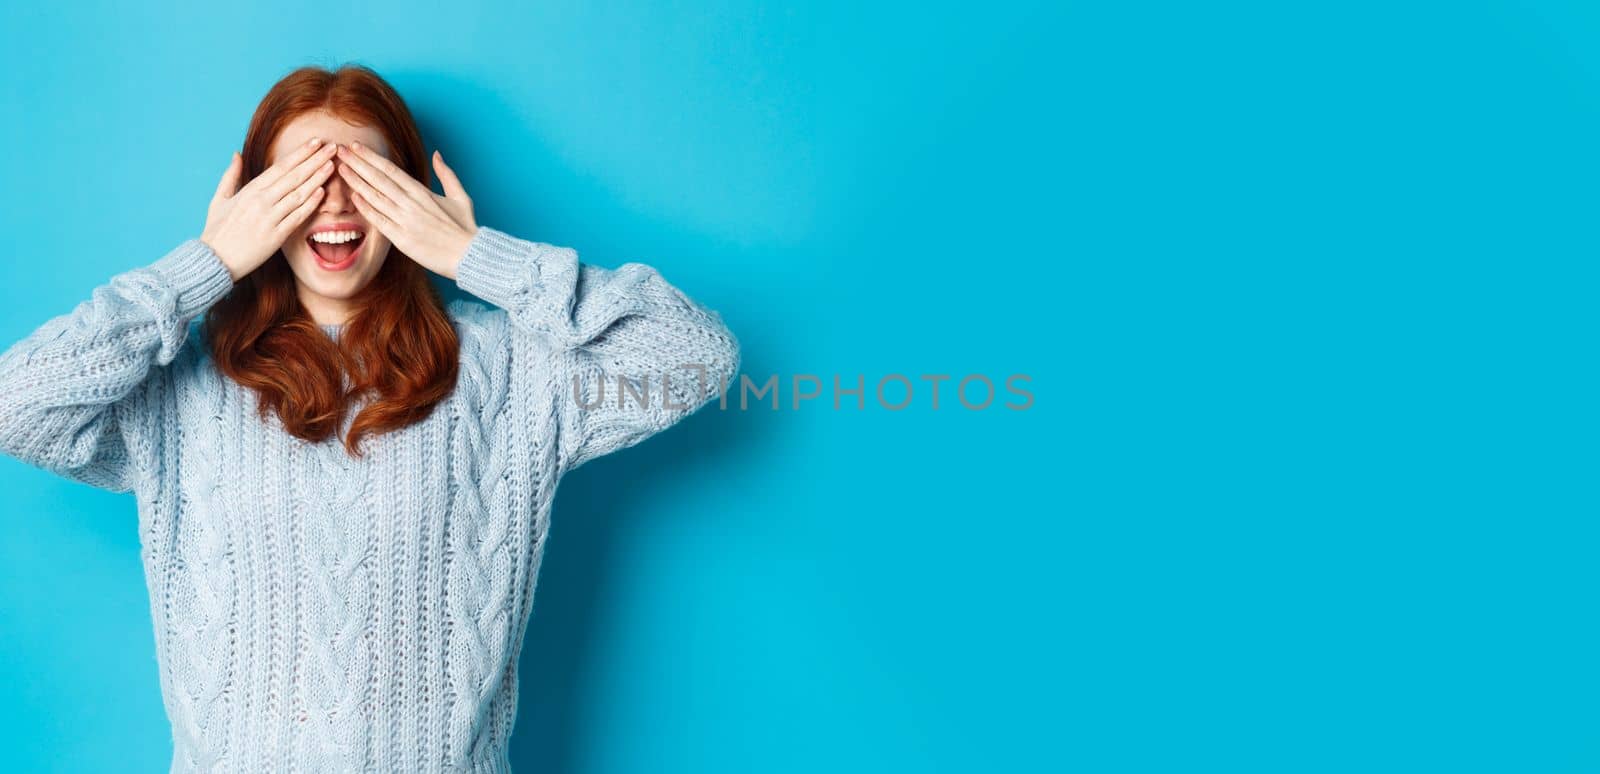 Cheerful redhead female model close eyes and waiting for christmas gift, holding hands on face and smiling amused, anticipating surprise, standing over blue background.